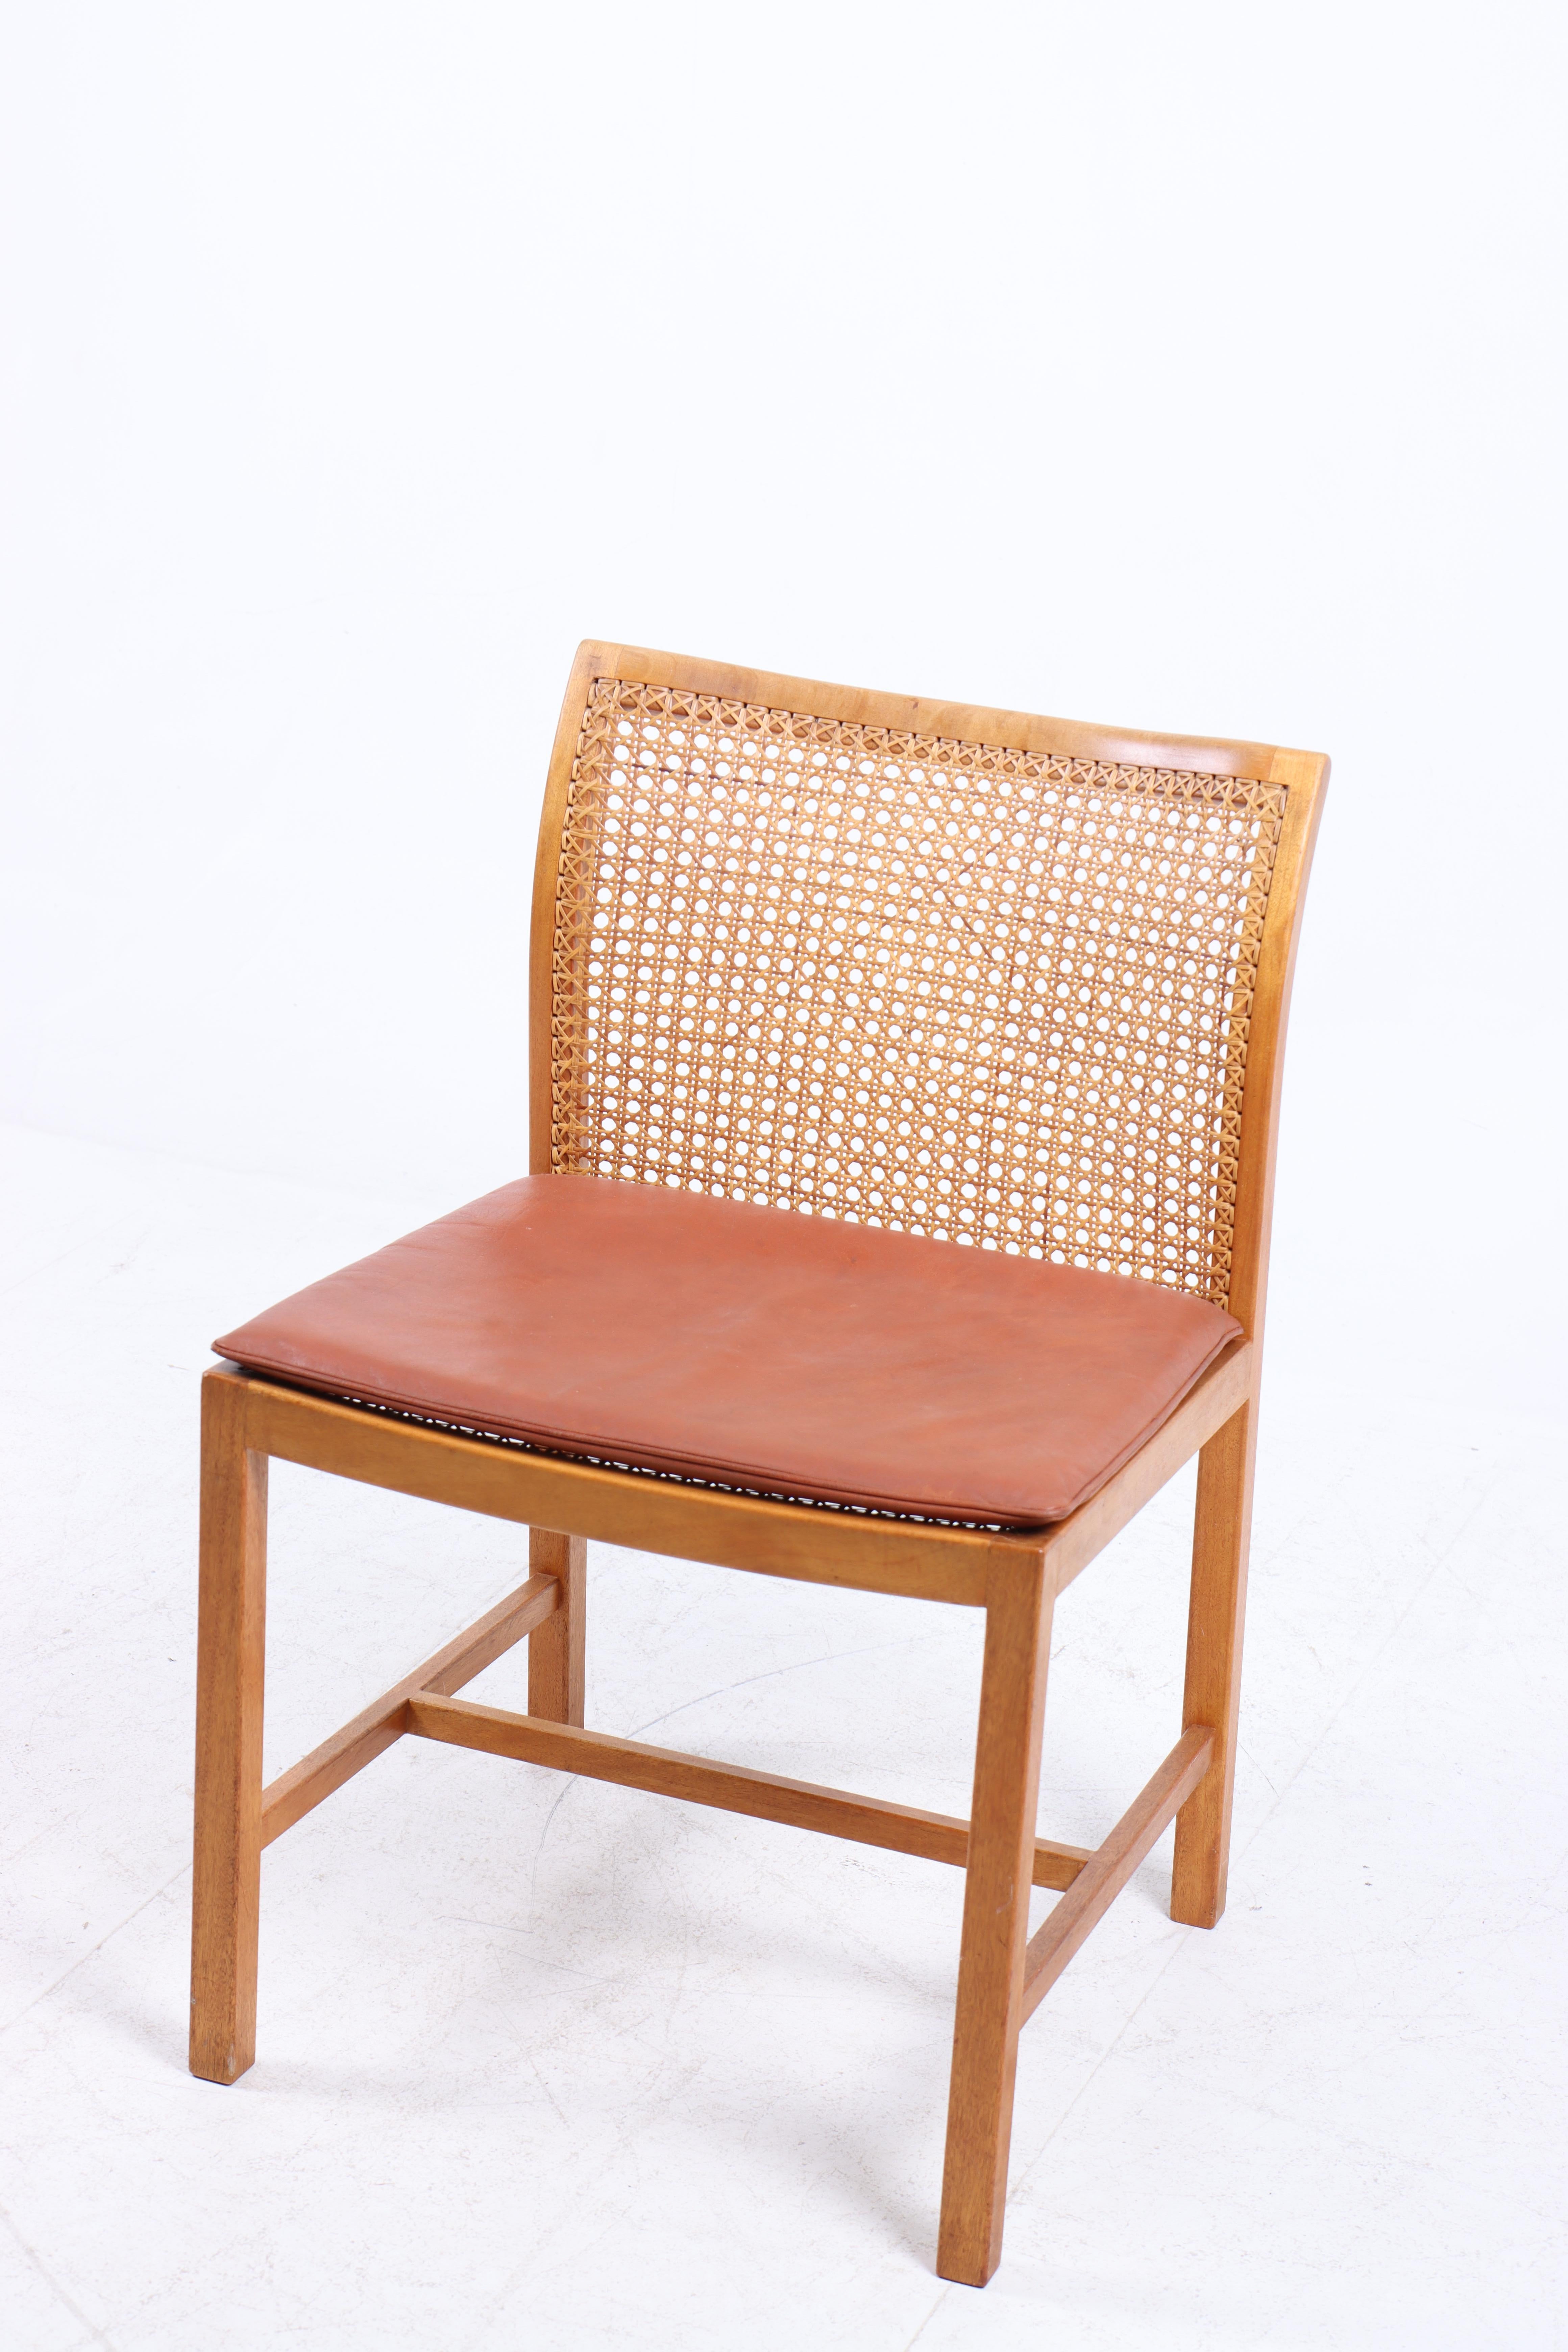 Side chair in mahogany, cane and patinated leather. Designed by Ditte & Adrian Heath for Søren Horn cabinetmakers. Made in Denmark in the 1960s. Great original condition.